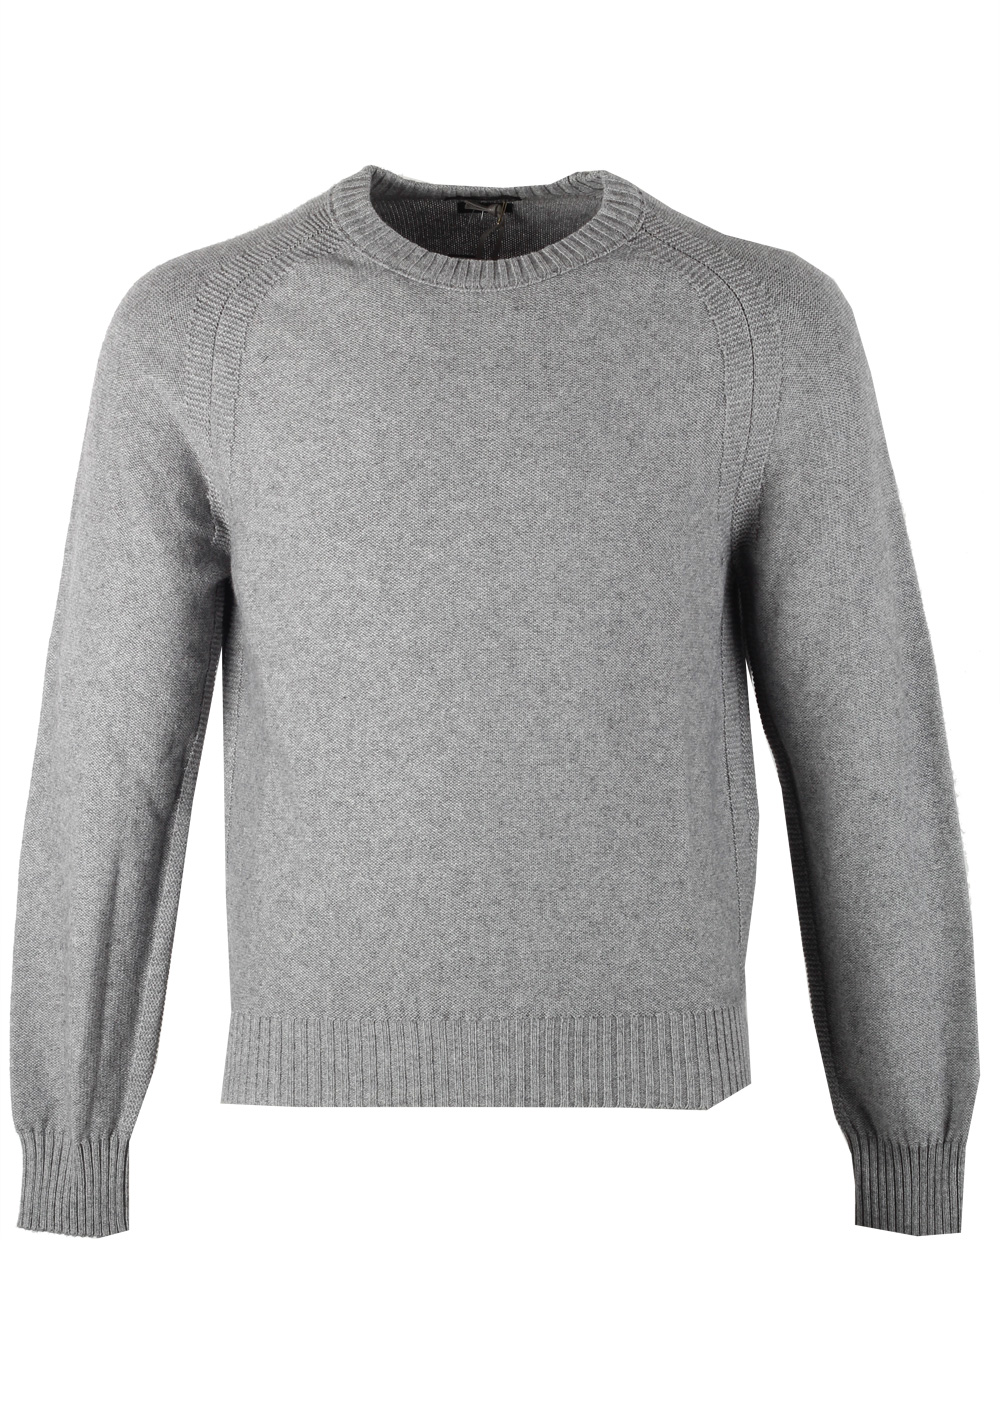 TOM FORD Gray Crew Neck Sweater Size 48 / 38R U.S. In Cashmere Blend ...